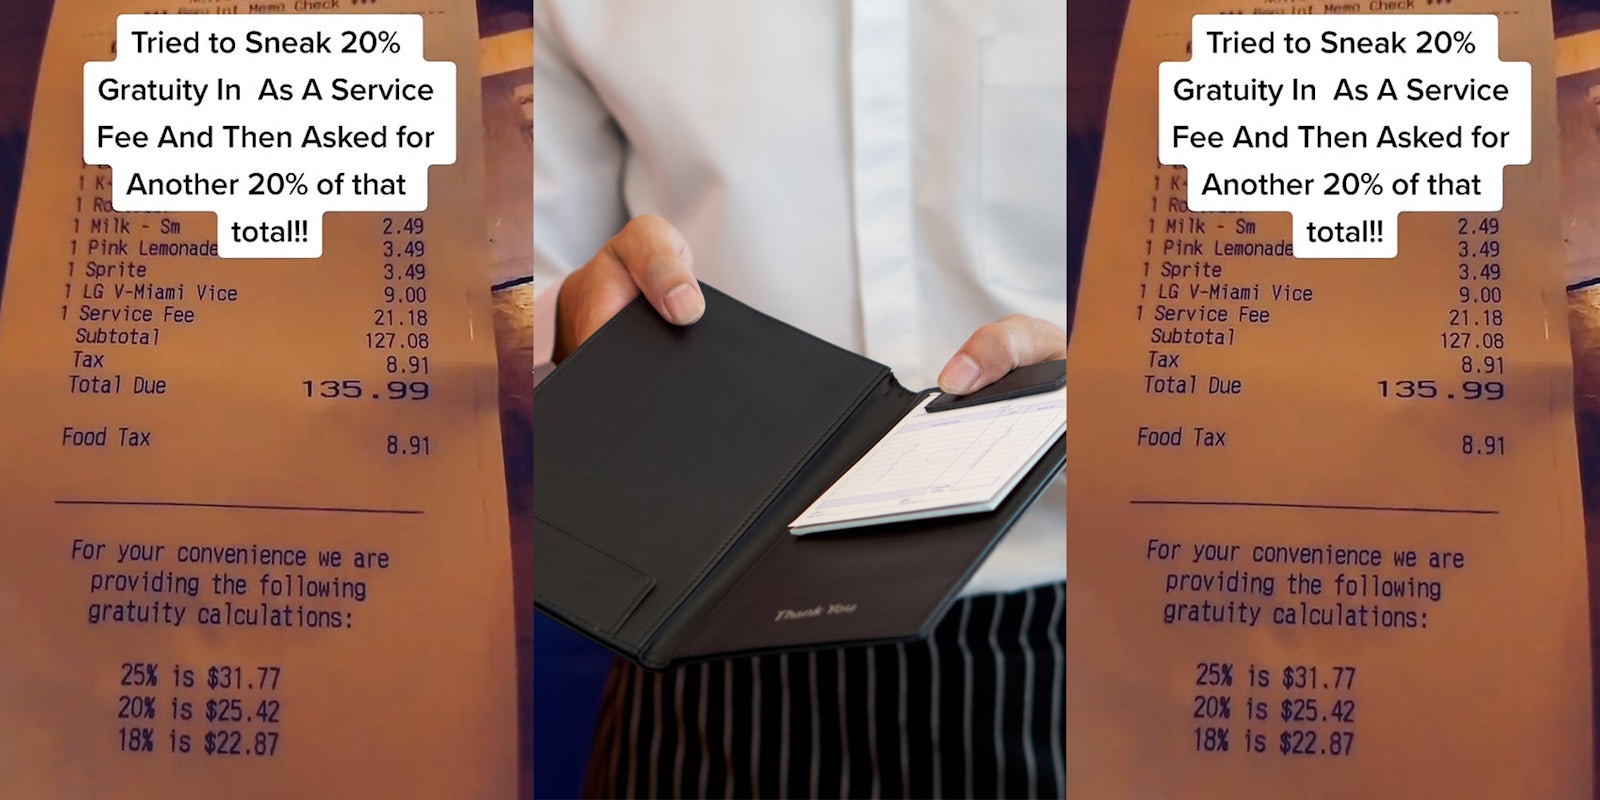 receipt on table caption 'Tried to Sneak 20% Gratuity In As A Service Fee And Then Asked for Another 20% of that total!!'(l) waiter presenting receipt (c) receipt on table caption 'Tried to Sneak 20% Gratuity In As A Service Fee And Then Asked for Another 20% of that total!!' (r)